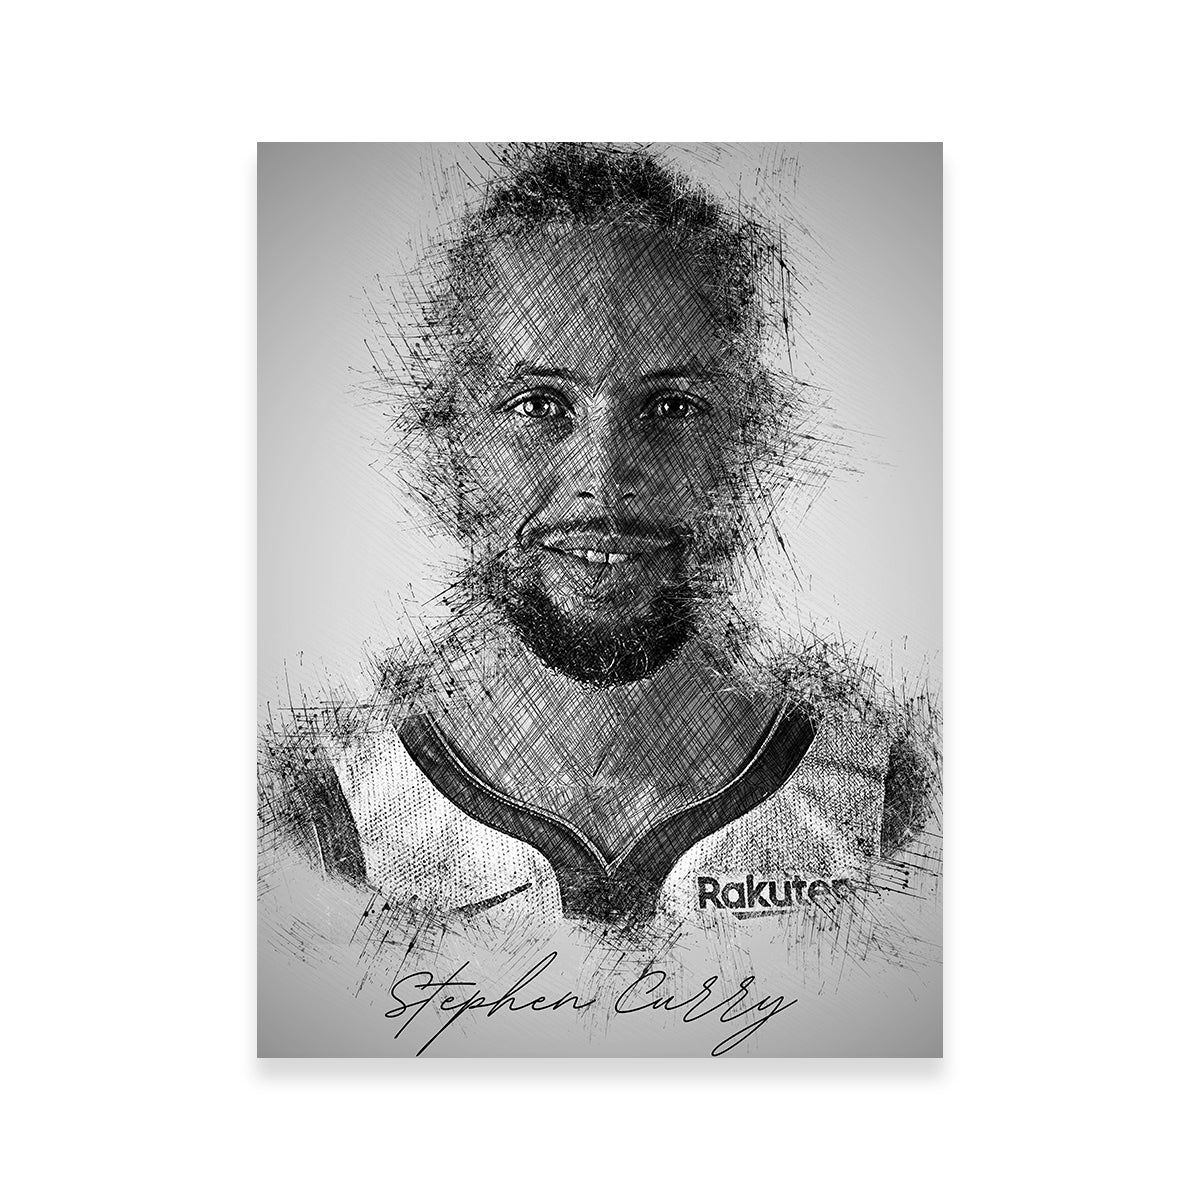 Steph Curry Drawing 